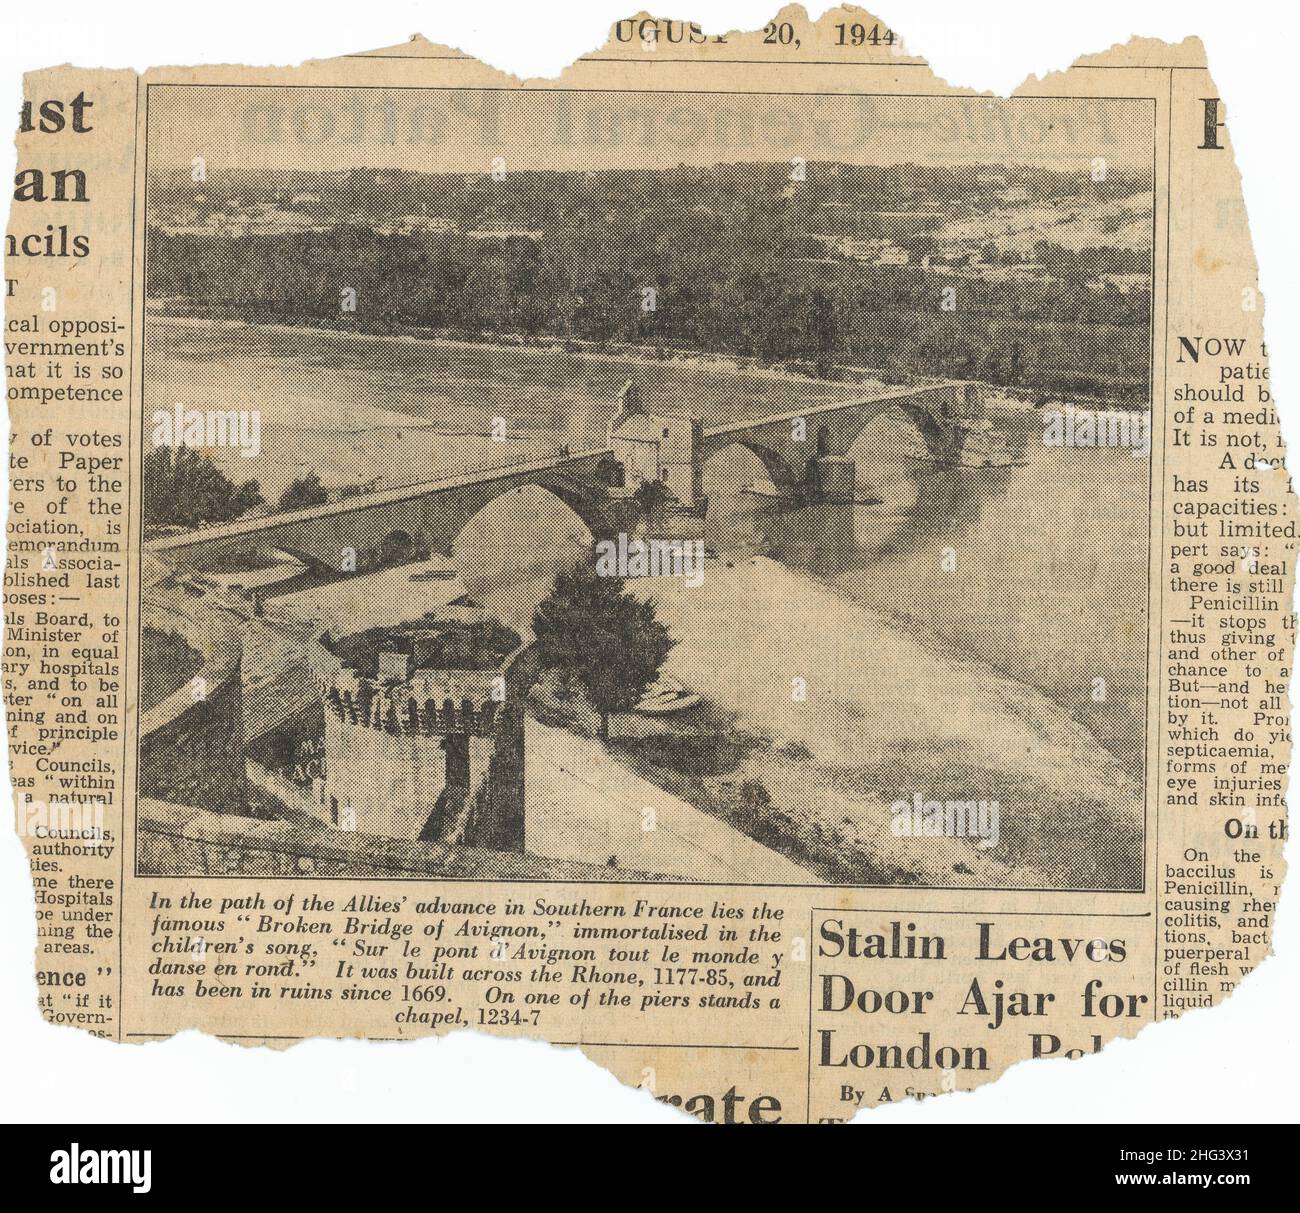 Torn out British newspaper cutting from August 1944 showing ancient bridge at Avignon, France, in path of advancing troops during World War 2. Stock Photo